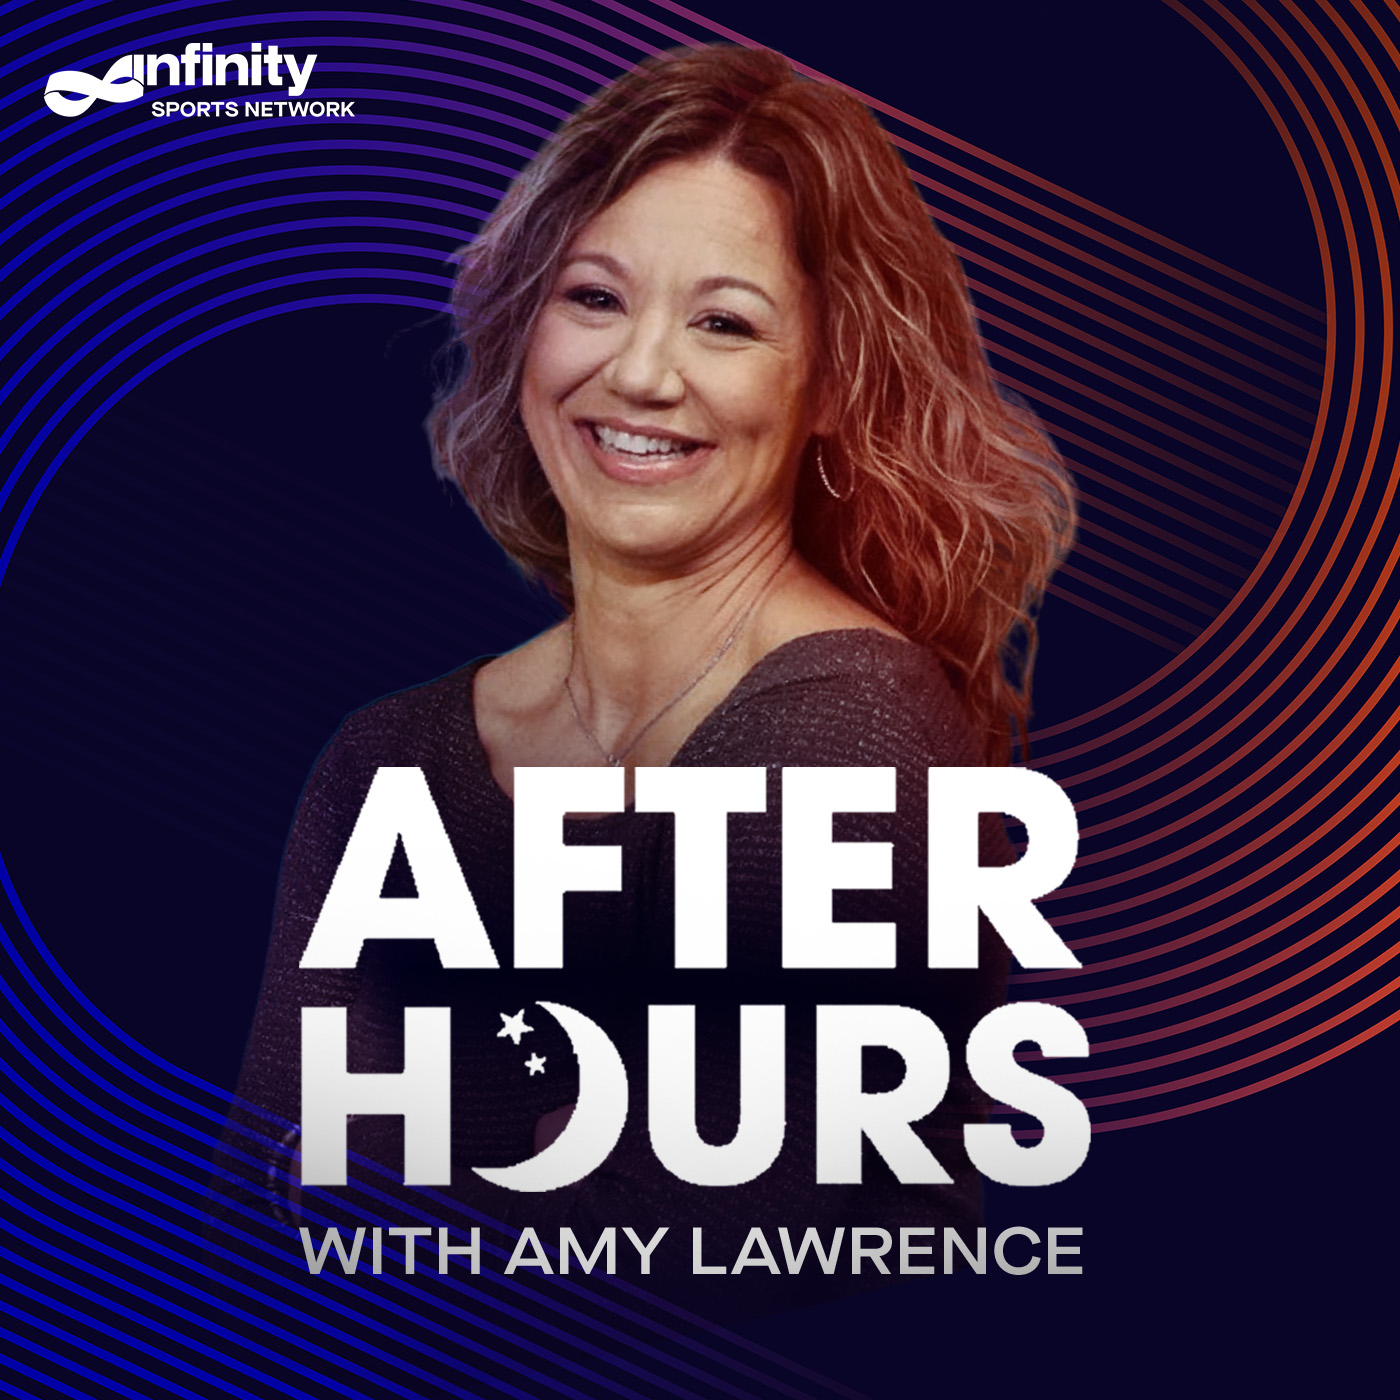 9-24-21 After Hours with Amy Lawrence PODCAST: Hour 1